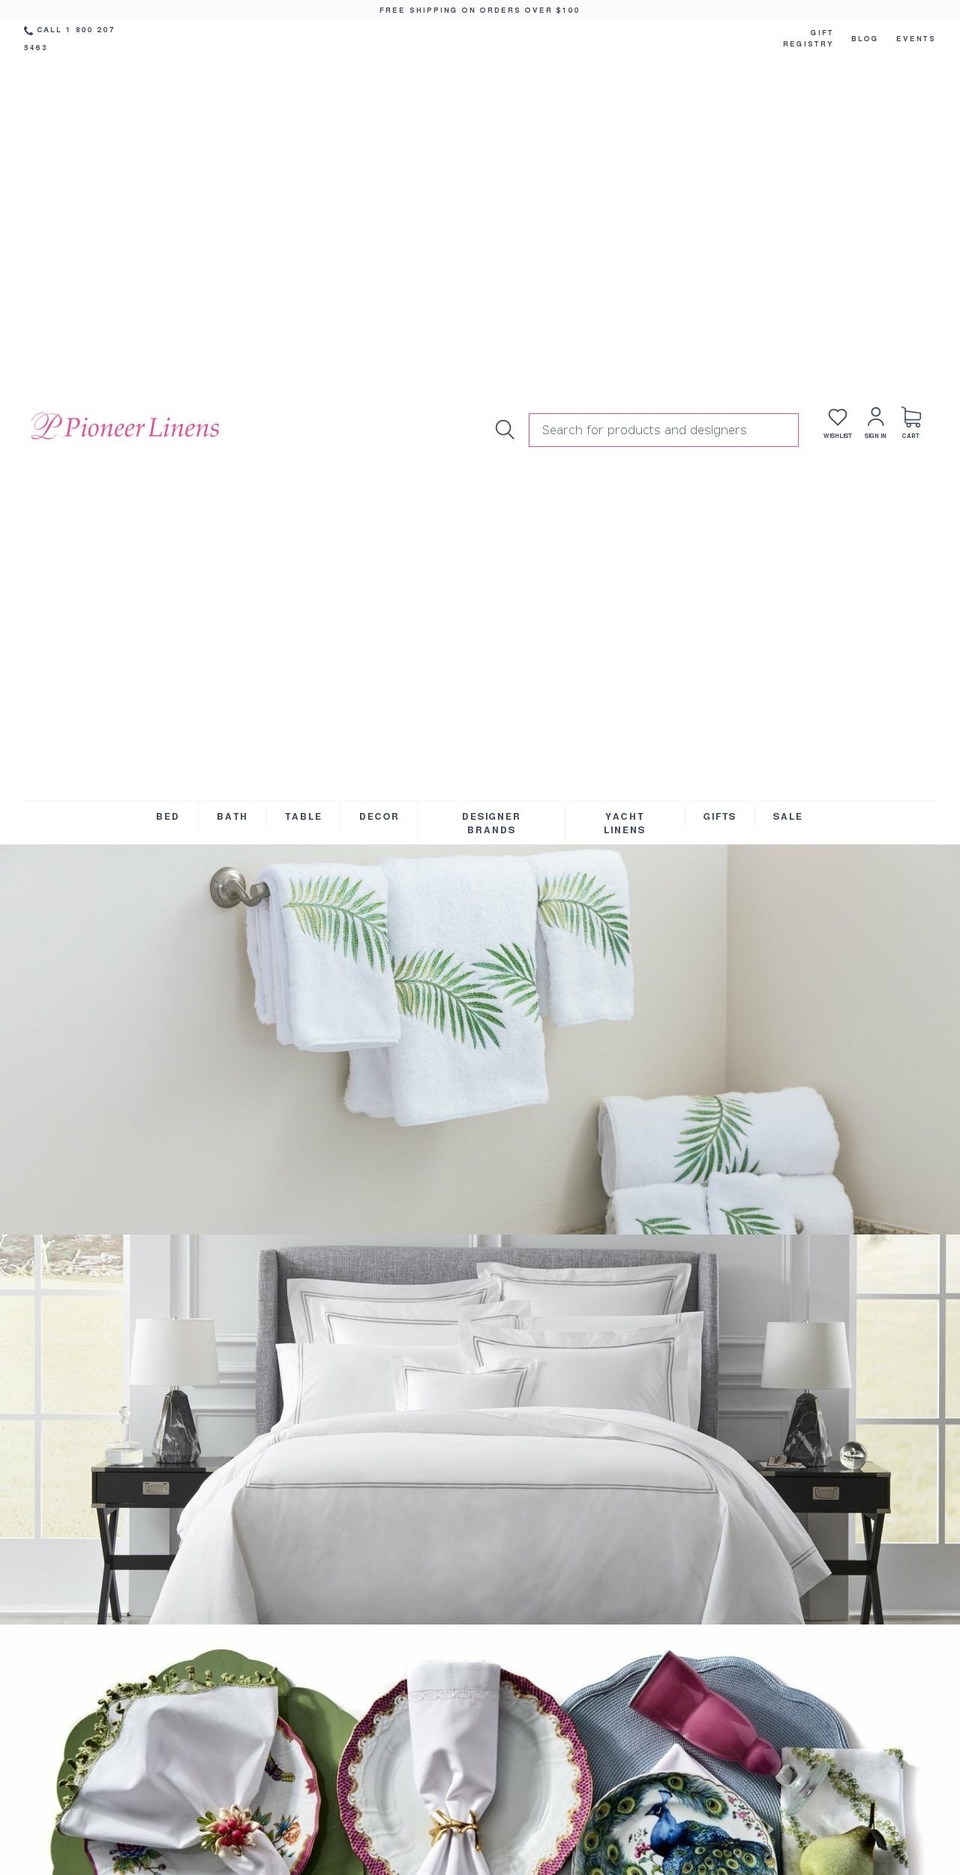 Buko Shopify Theme - Products Consolidation Shopify theme site example loomlinens.net